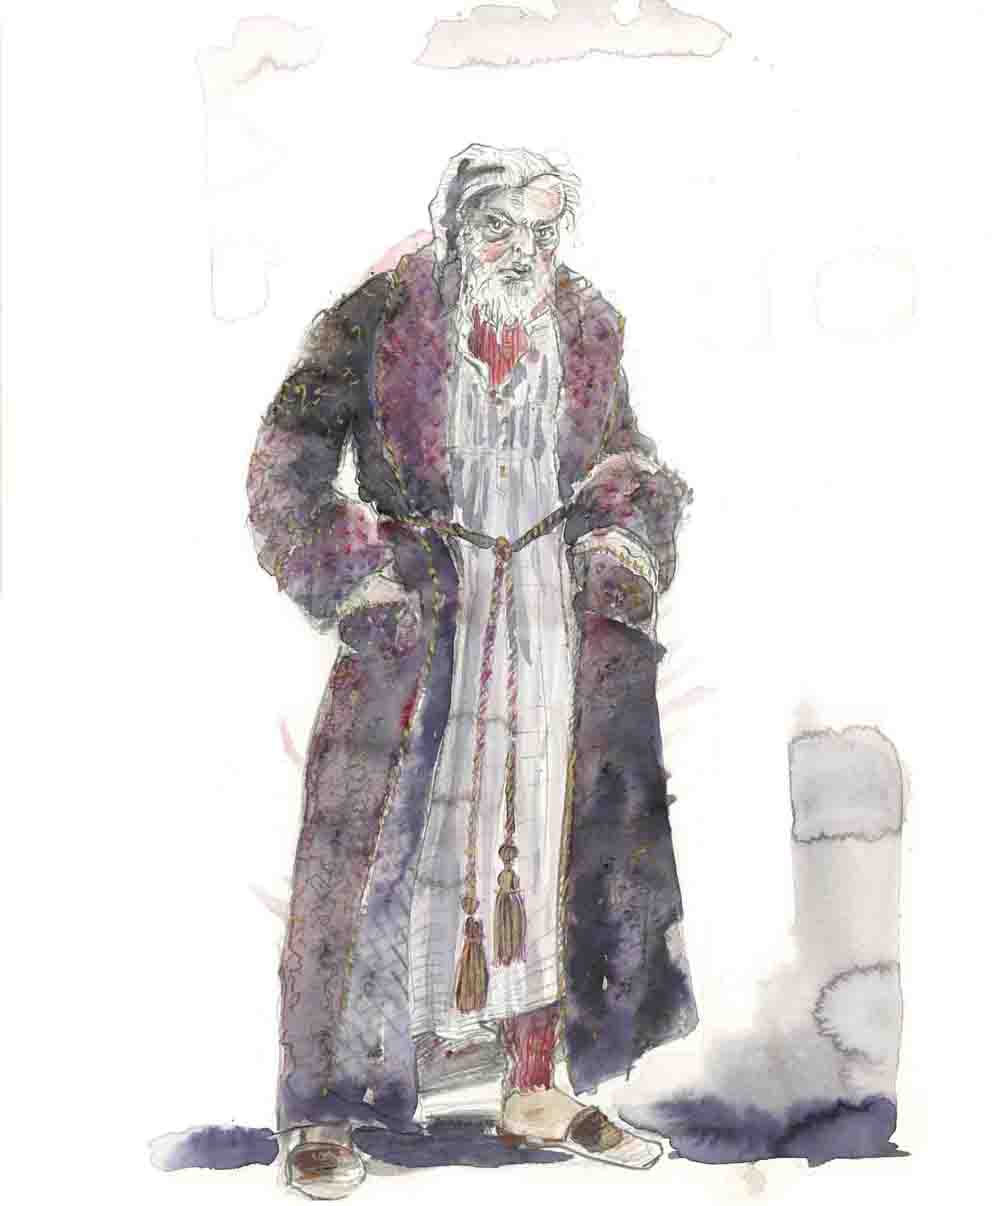 Sketch for Walter Charles as Ebenezer Scrooge, A Christmas Carol, “The Lights of Long Ago”, Graphite/  Watercolor/ Gouache/ Metallic marker on Bristol board, 14 x 17 inches